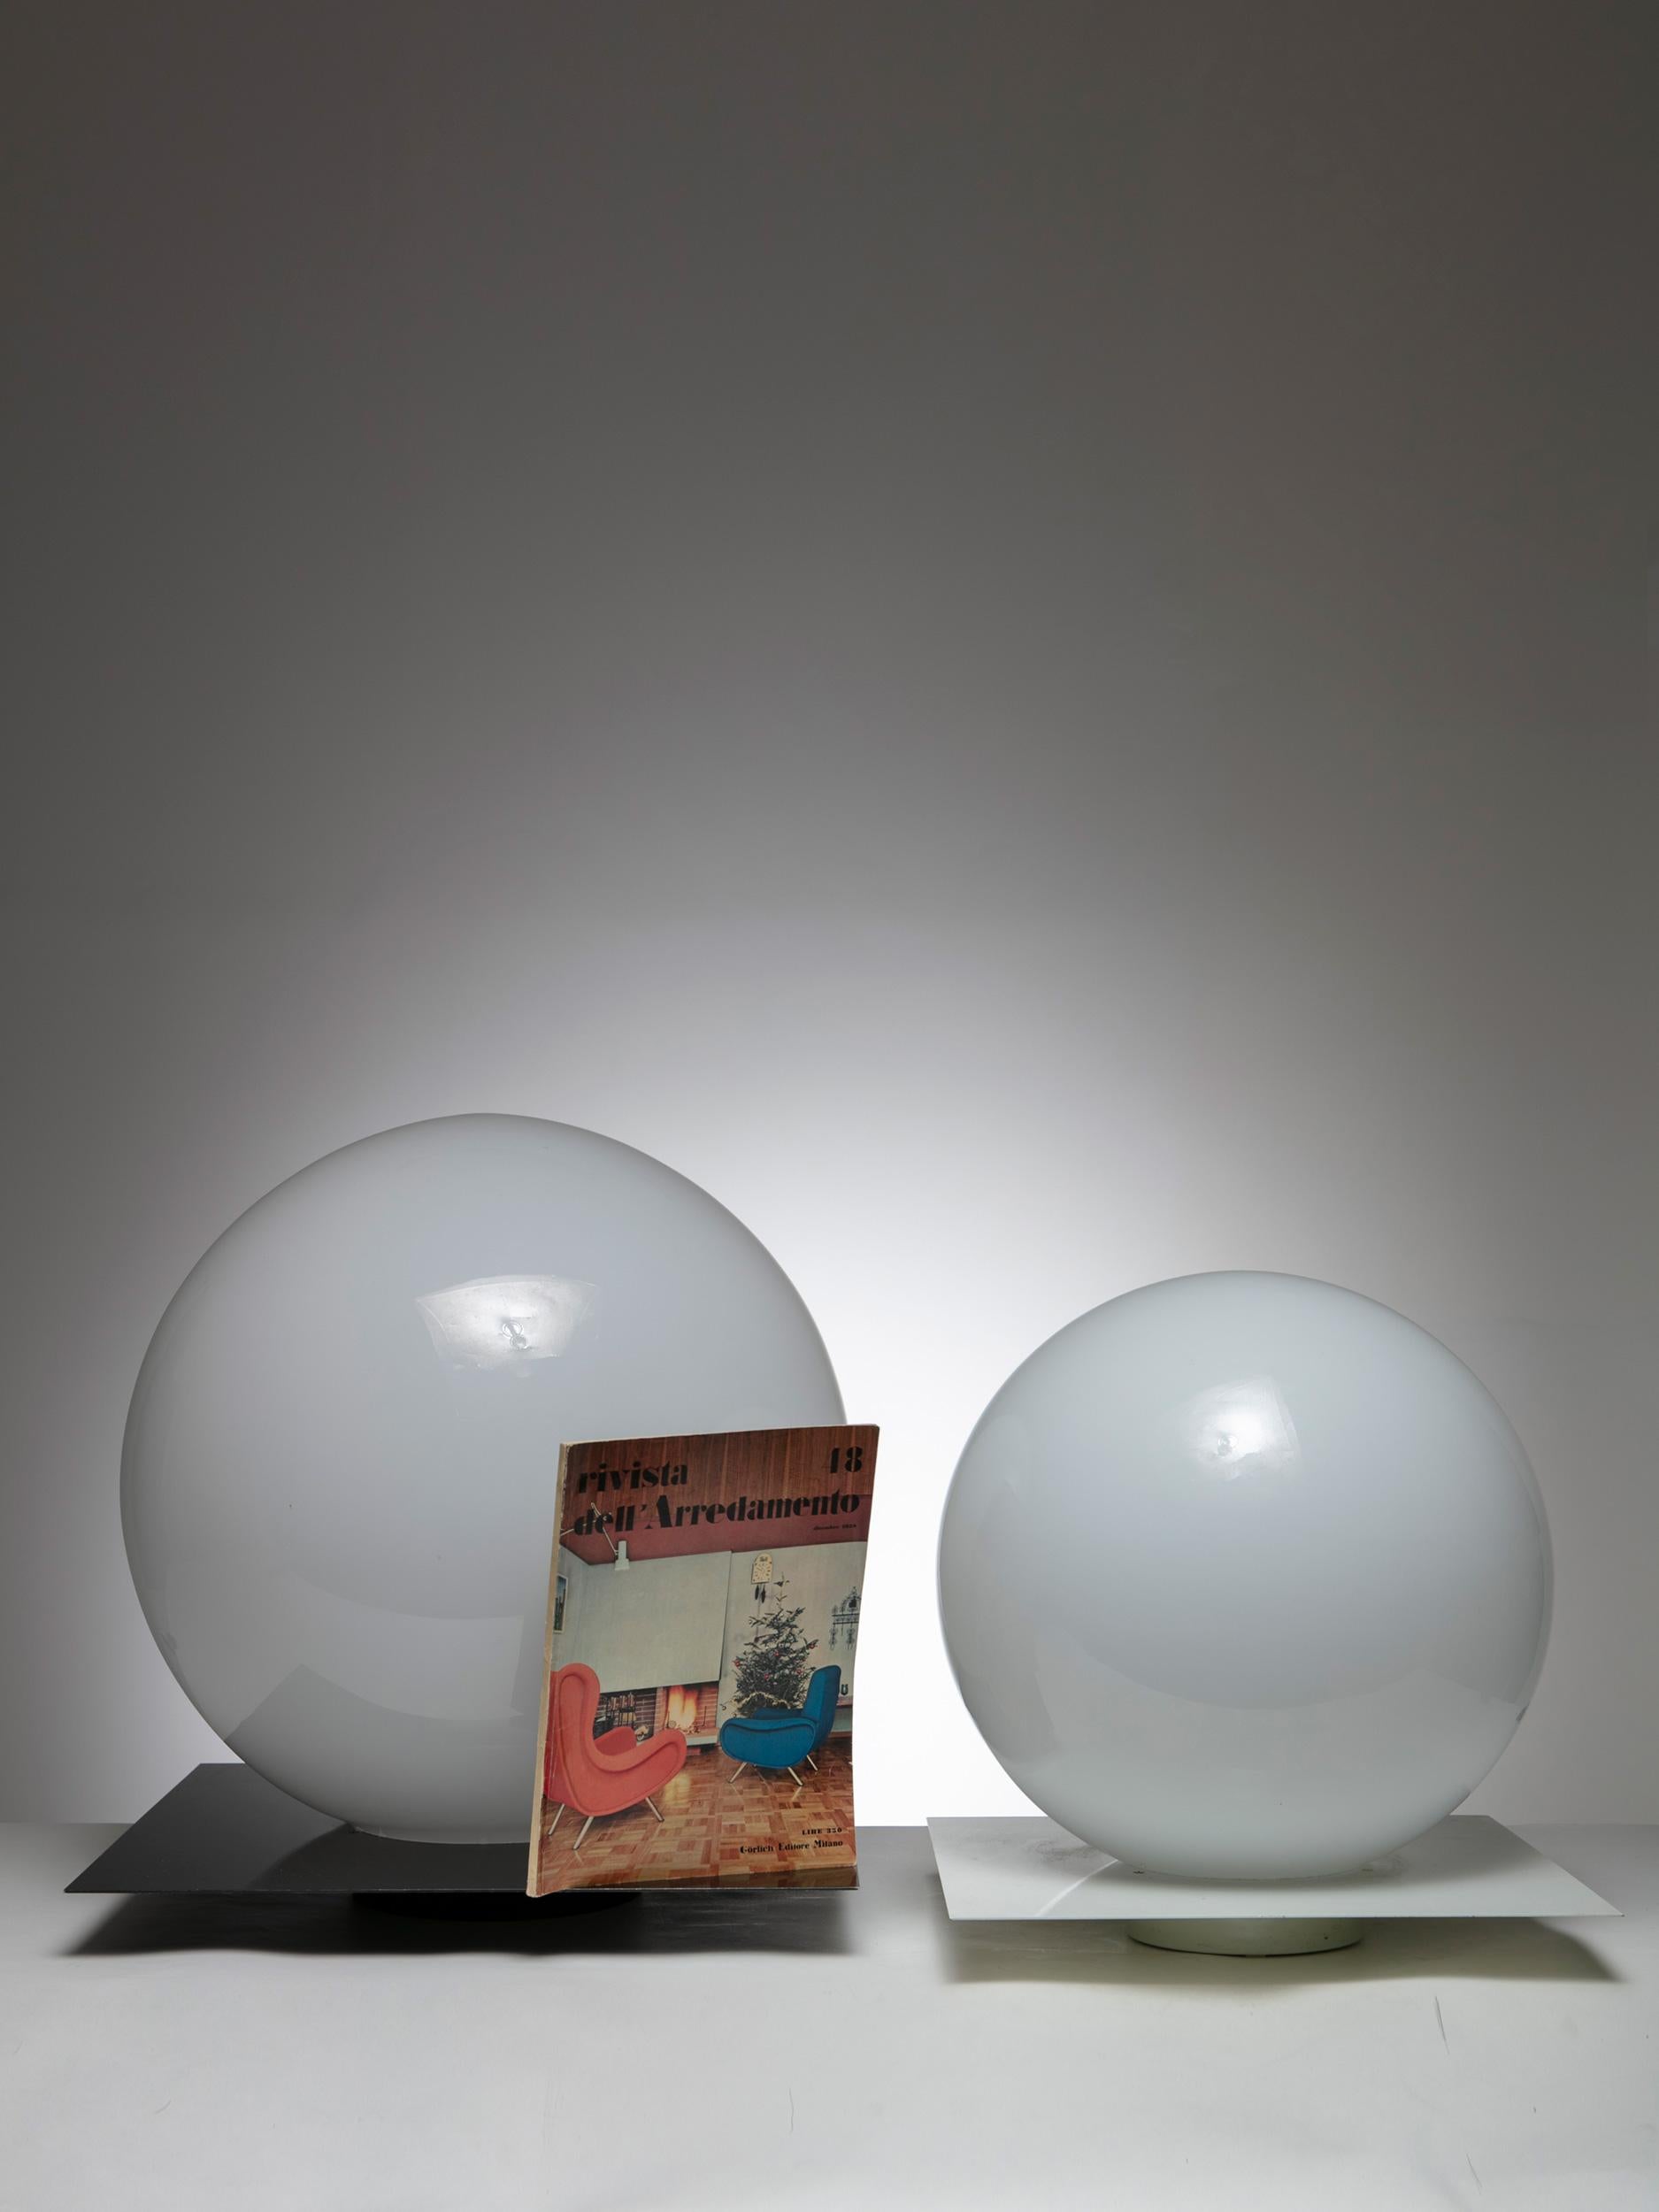 Pair of Micol table lamps by Sergio Mazza and Giuliana Gramigna for Quattrifolio.
Opaline glass shade supported by a squared metal plate, two different sizes and plate colors.